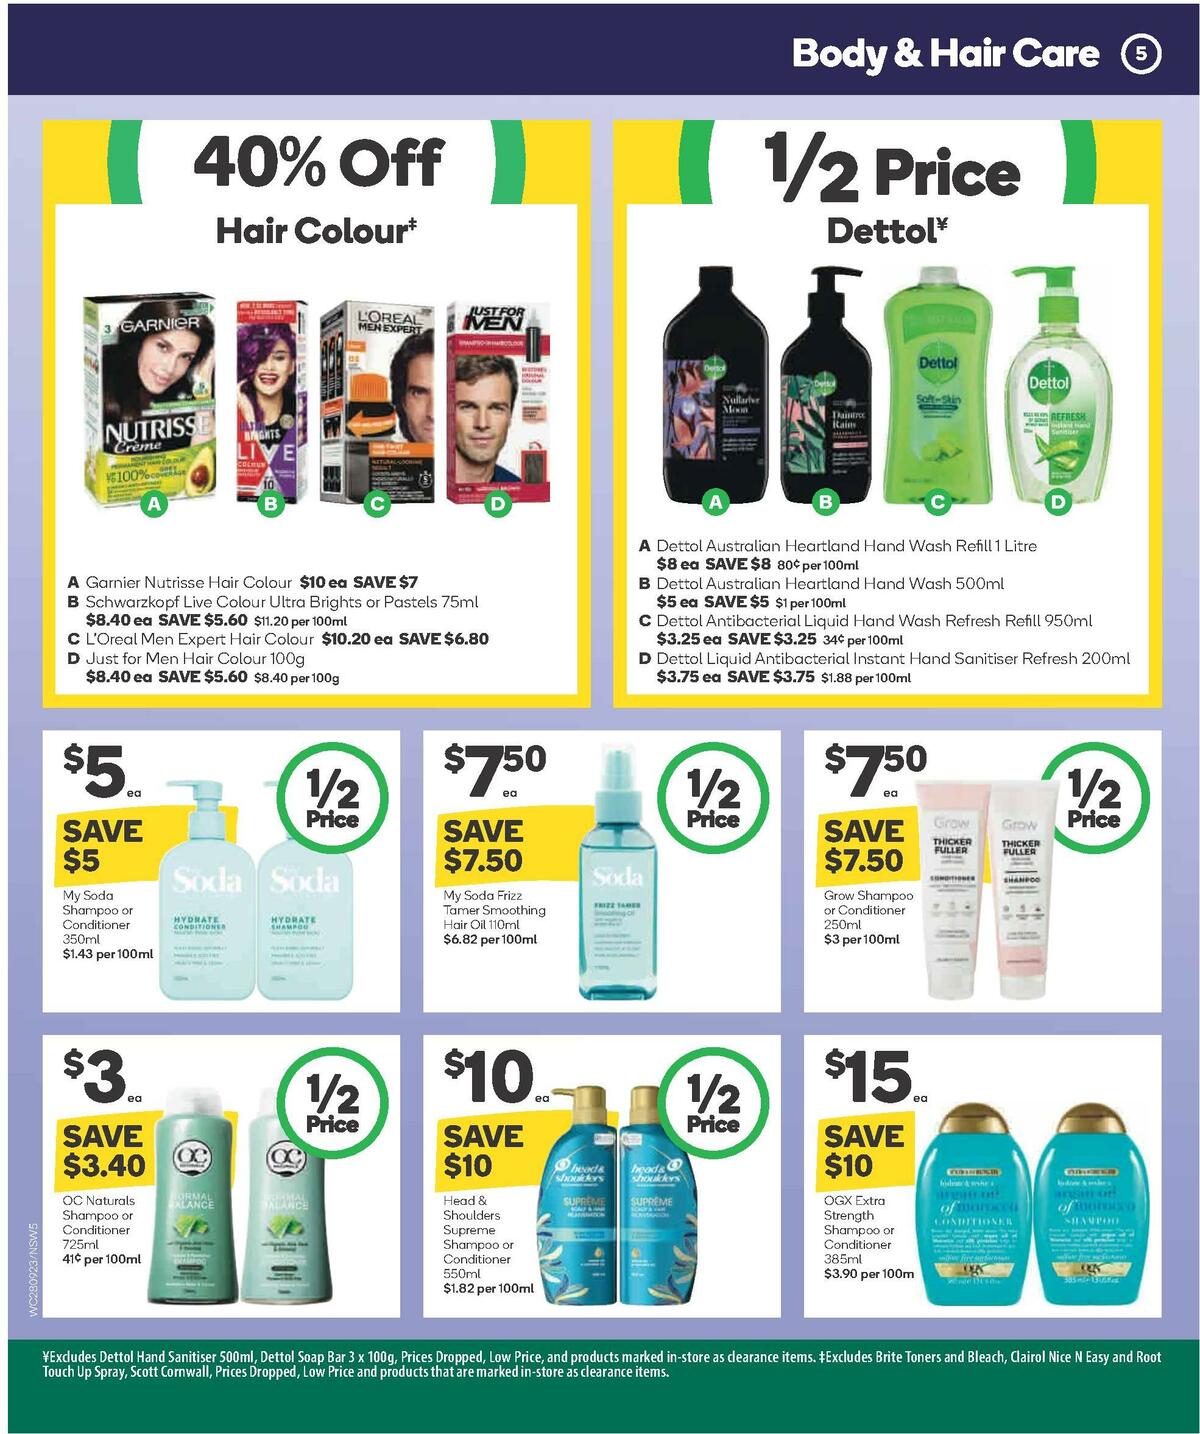 Woolworths Health & Beauty Catalogues from 5 October